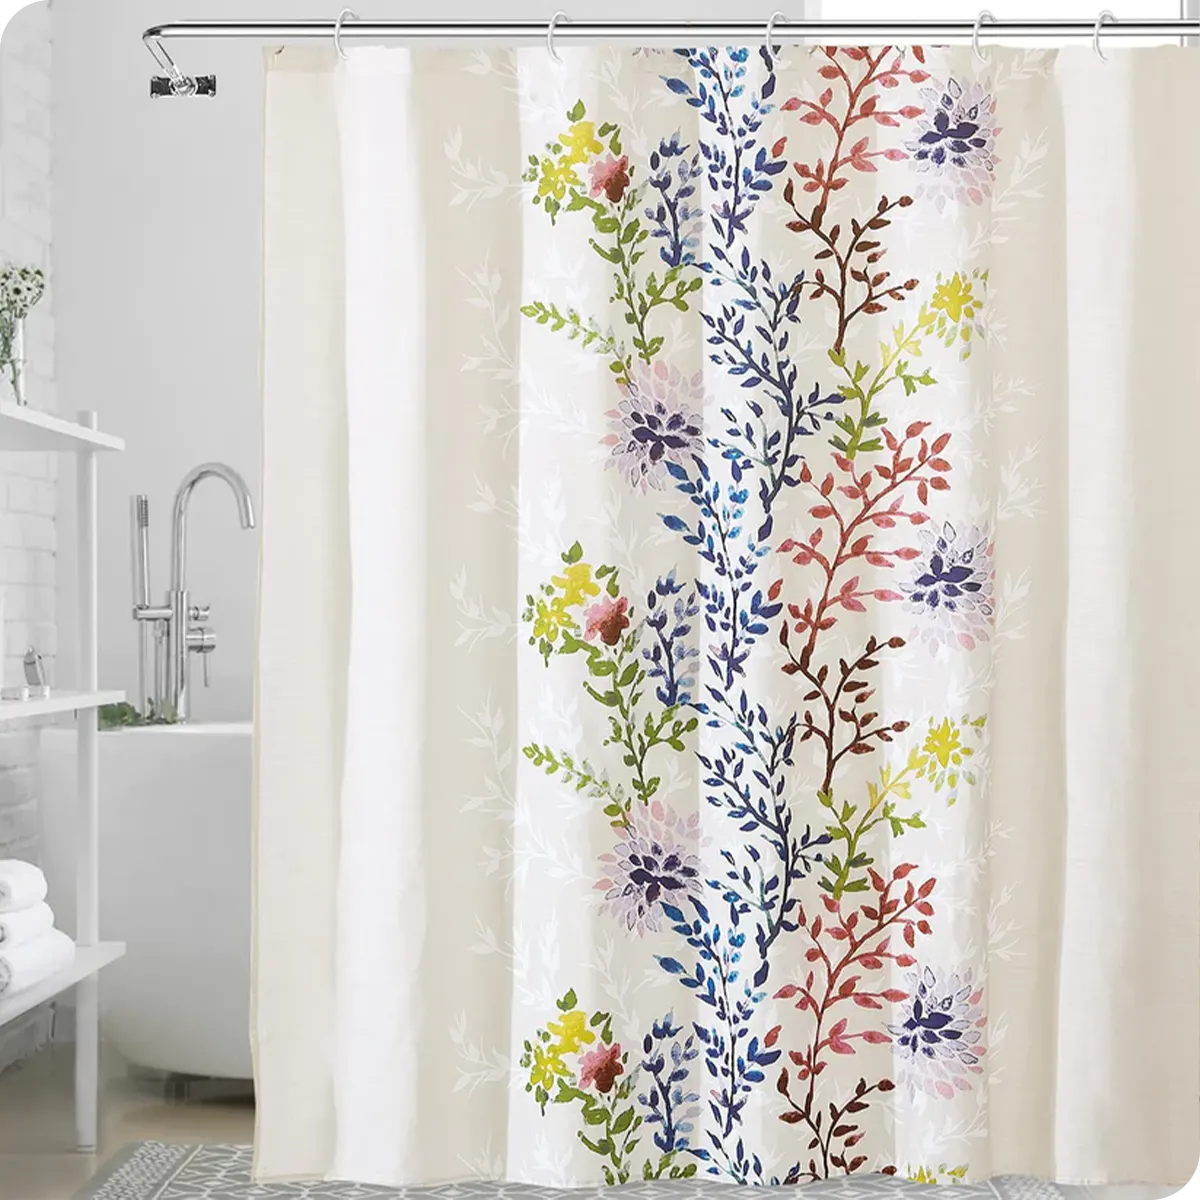 Bathroom Floral Shower Curtain front Display